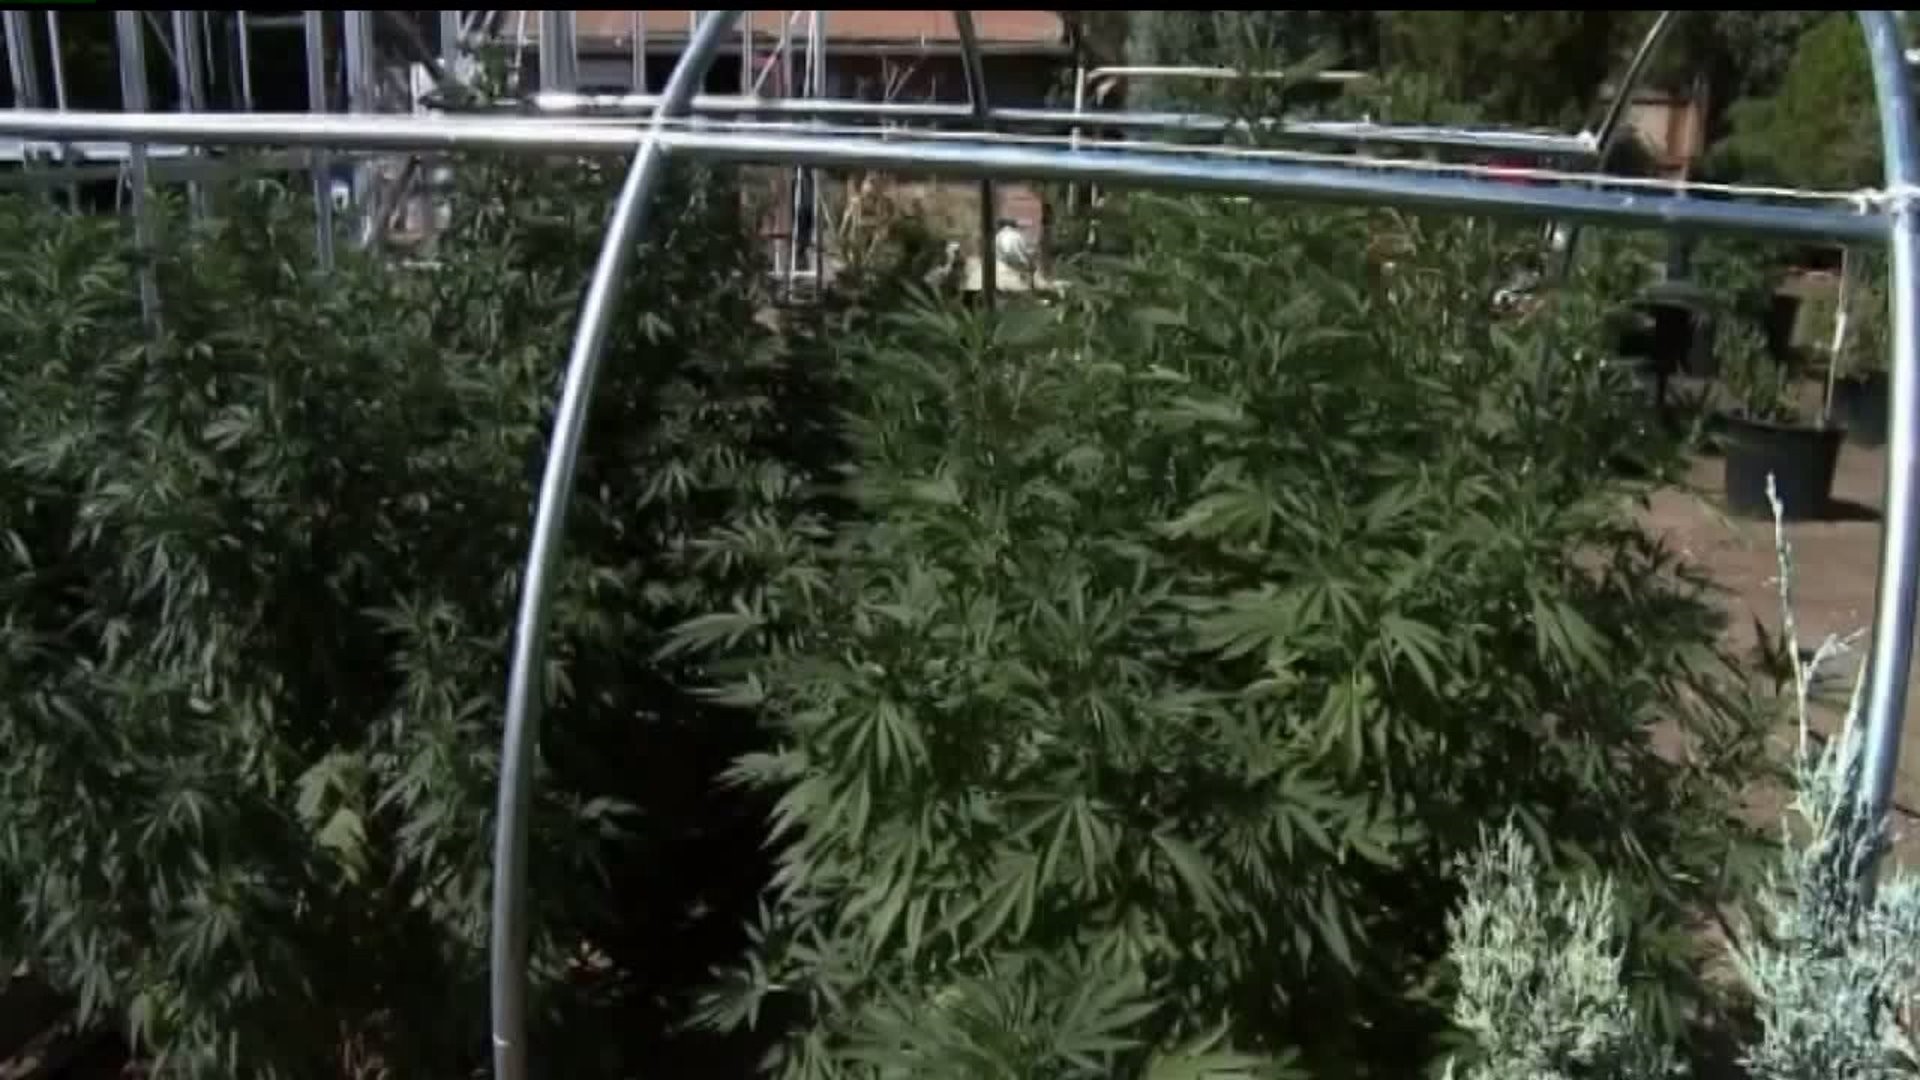 Company gets a second chance at a medical marijuana growing facility and dispensary in York County